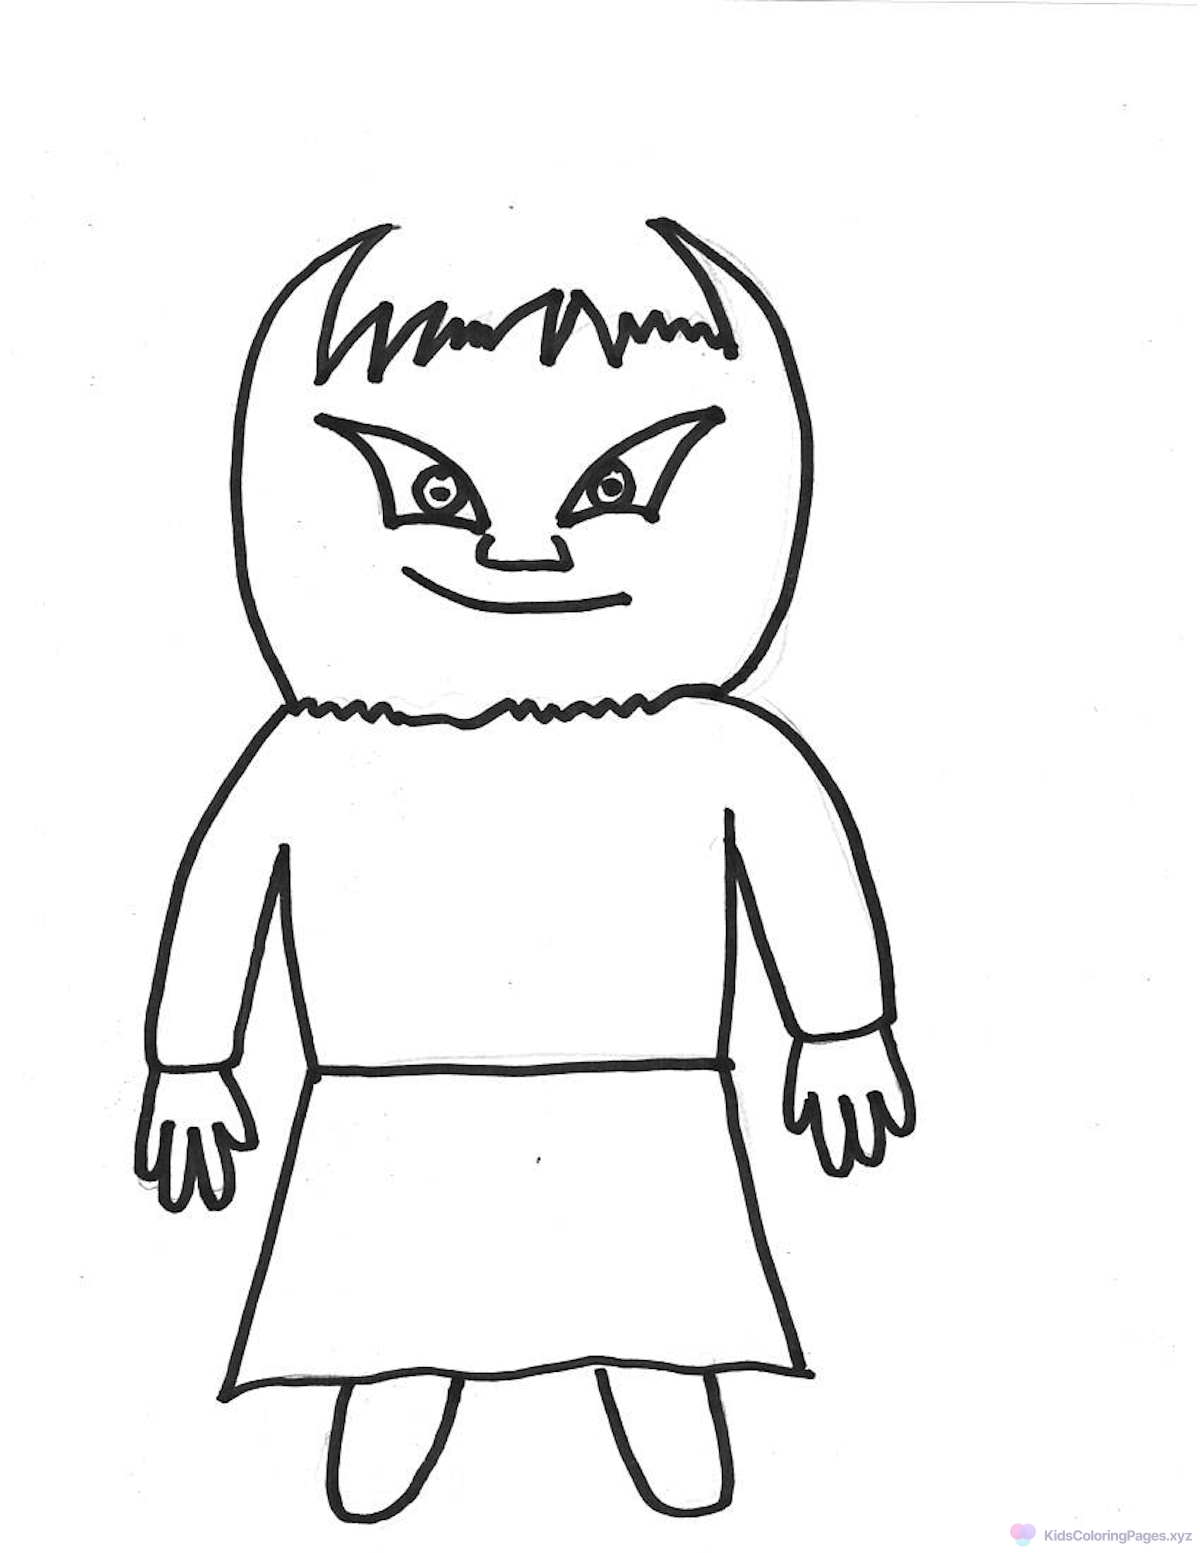 Friendly Monster coloring page for printing